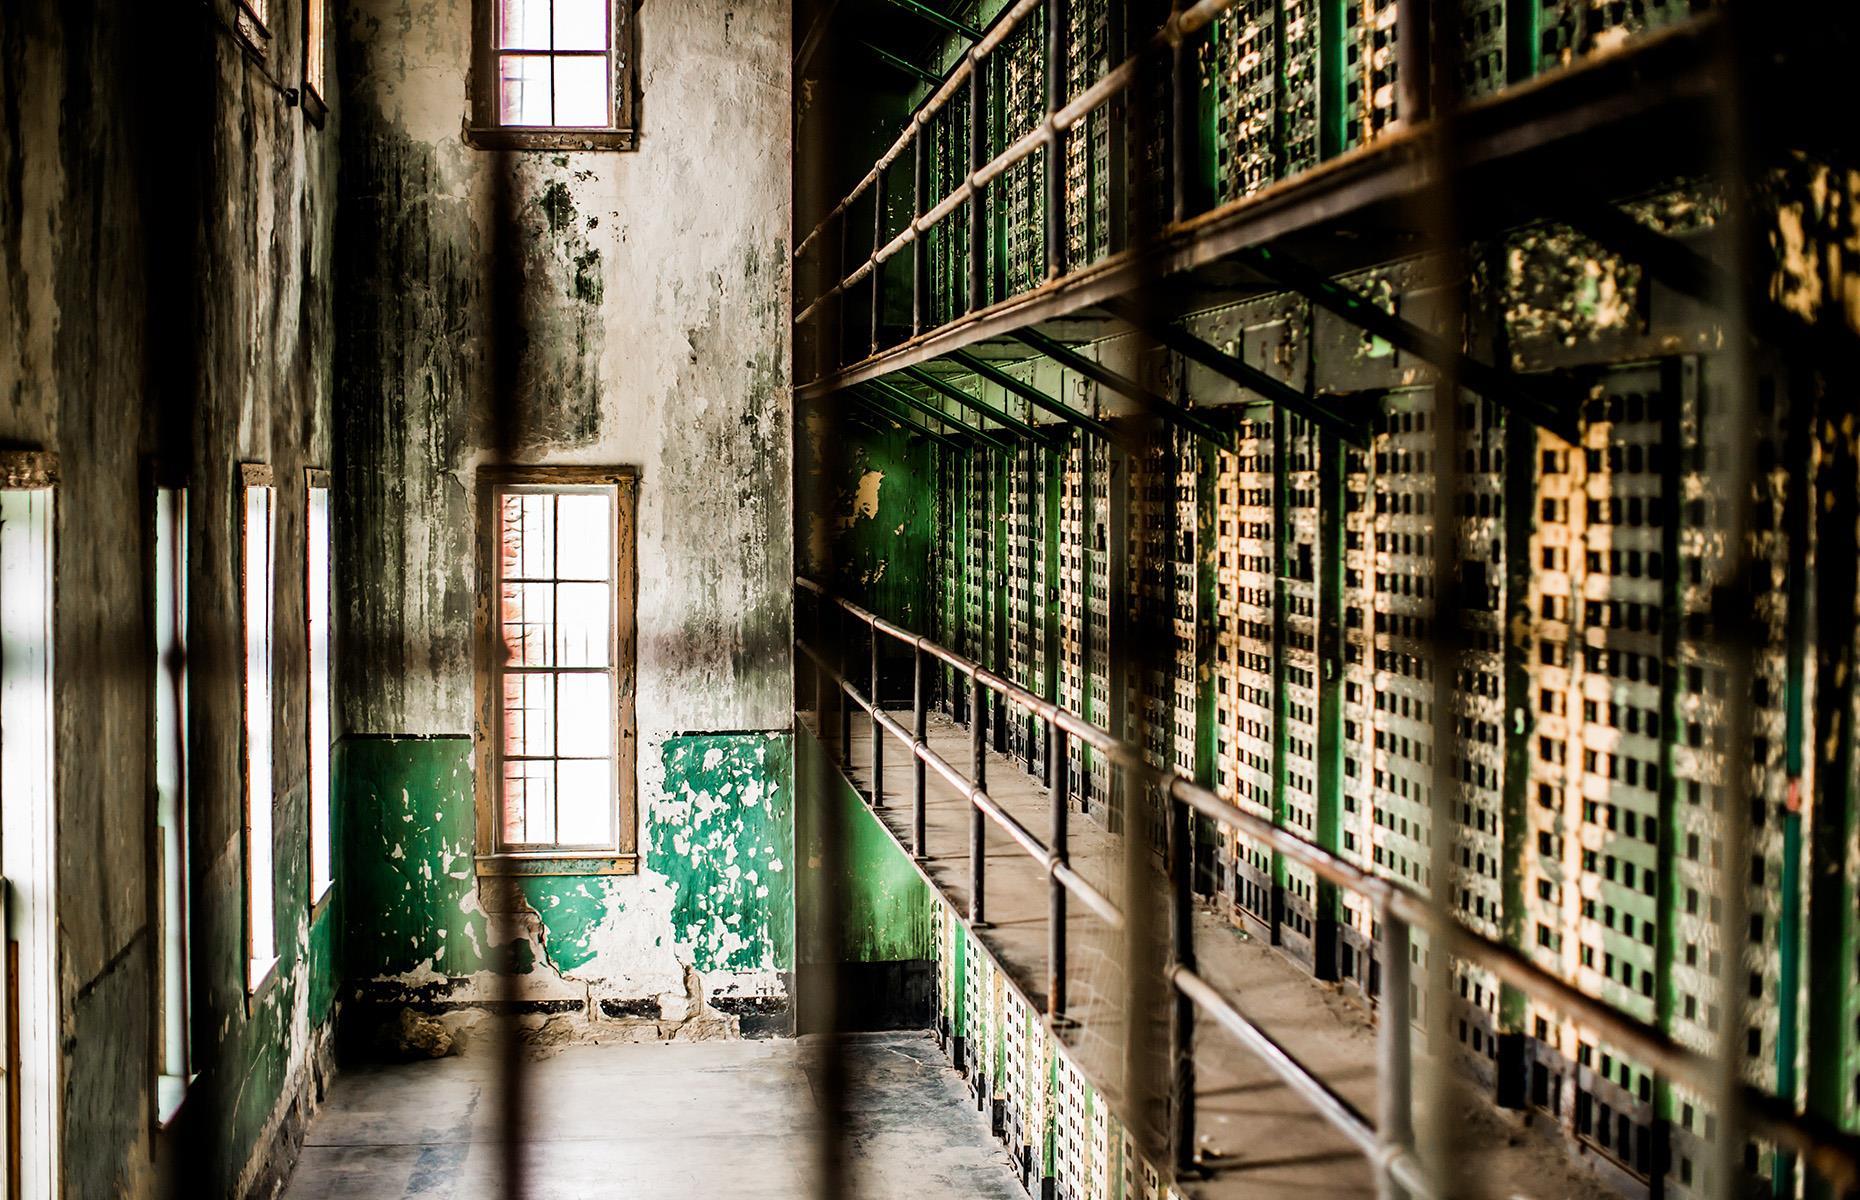 <p><a href="https://history.idaho.gov/oldpen/">This foreboding penitentiary</a> has a history dating back to 1872, when its gates first clanged open for some of America's most hardened criminals. Those who visit the site today will hear tales of breakouts and riots, and have the chance to explore centuries-old cell blocks and solitary confinement areas. There might even be the chance to spy a ghostly resident too: the crew of reality TV show <em>Ghost Adventures</em> have descended on the prison to search for spirits. Most active is thought to be "Idaho's Jack the Ripper", Raymond Allen Snowden, who was executed in the haunting "Five House" area of the prison complex.</p>